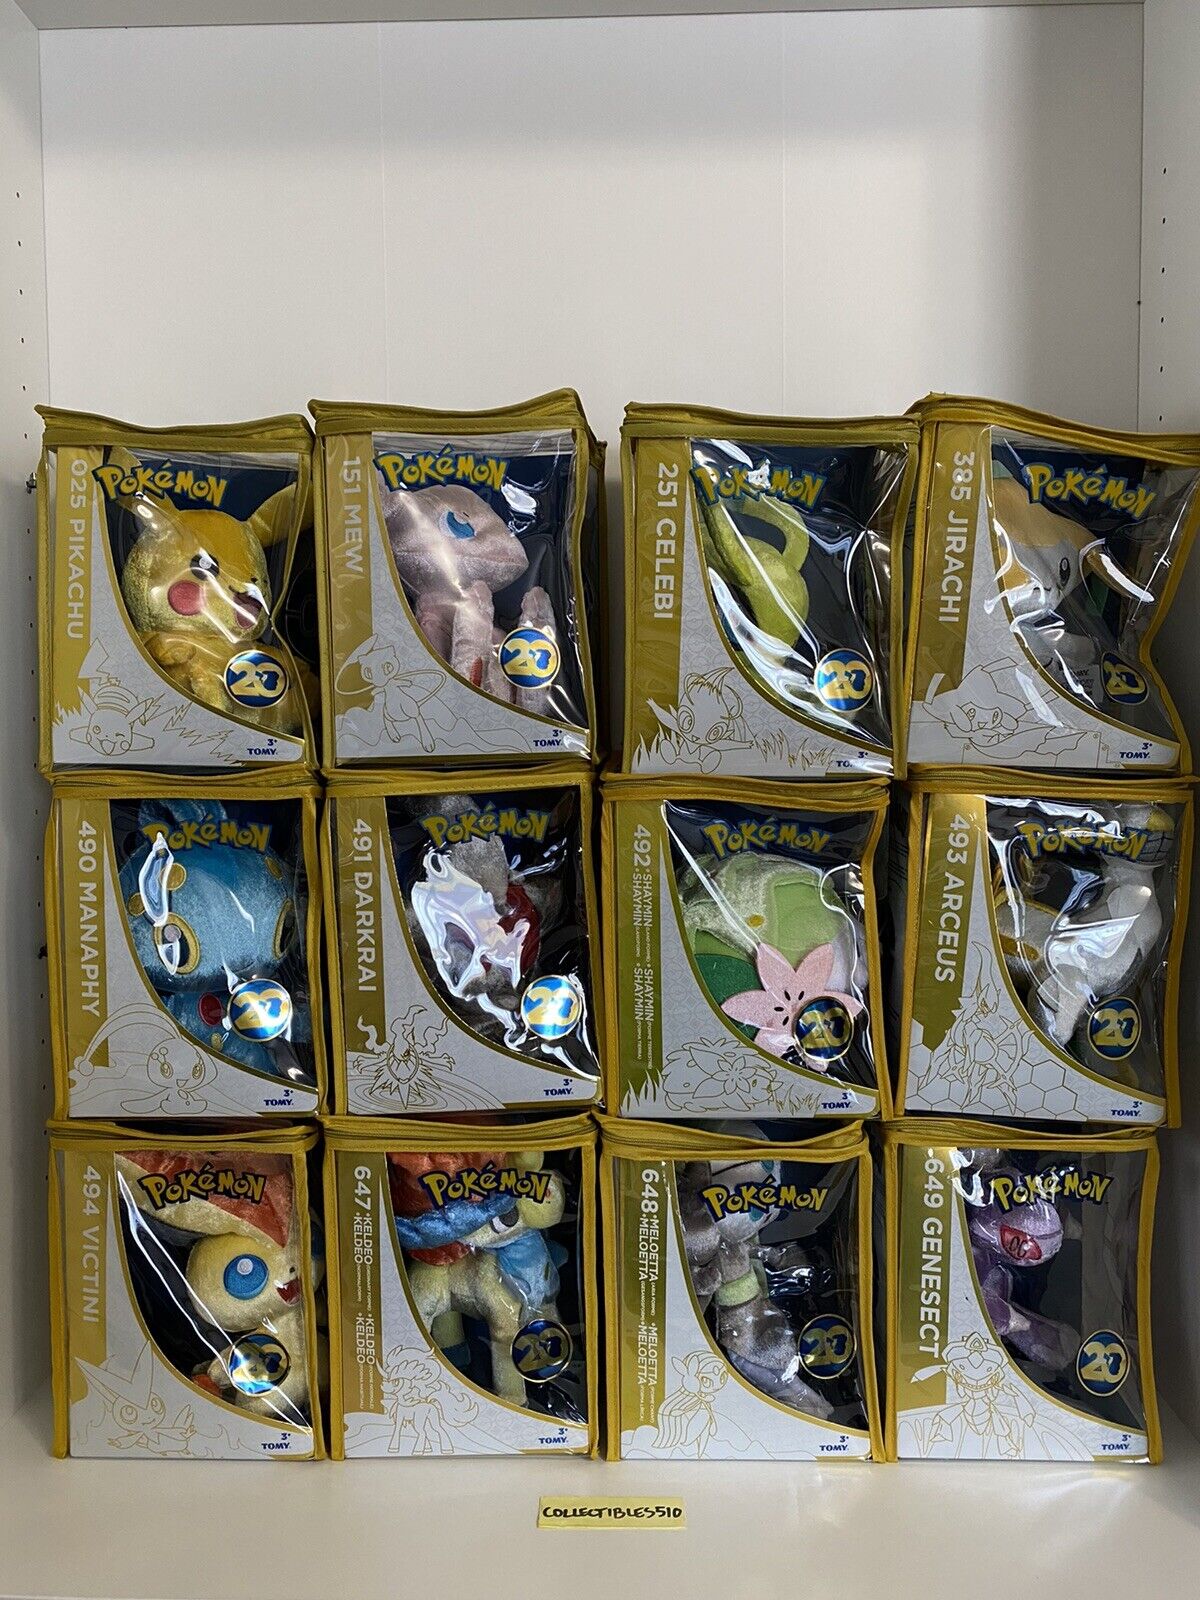  Pokemon 20th Anniversary Mythical Legendary plush collection set of 12